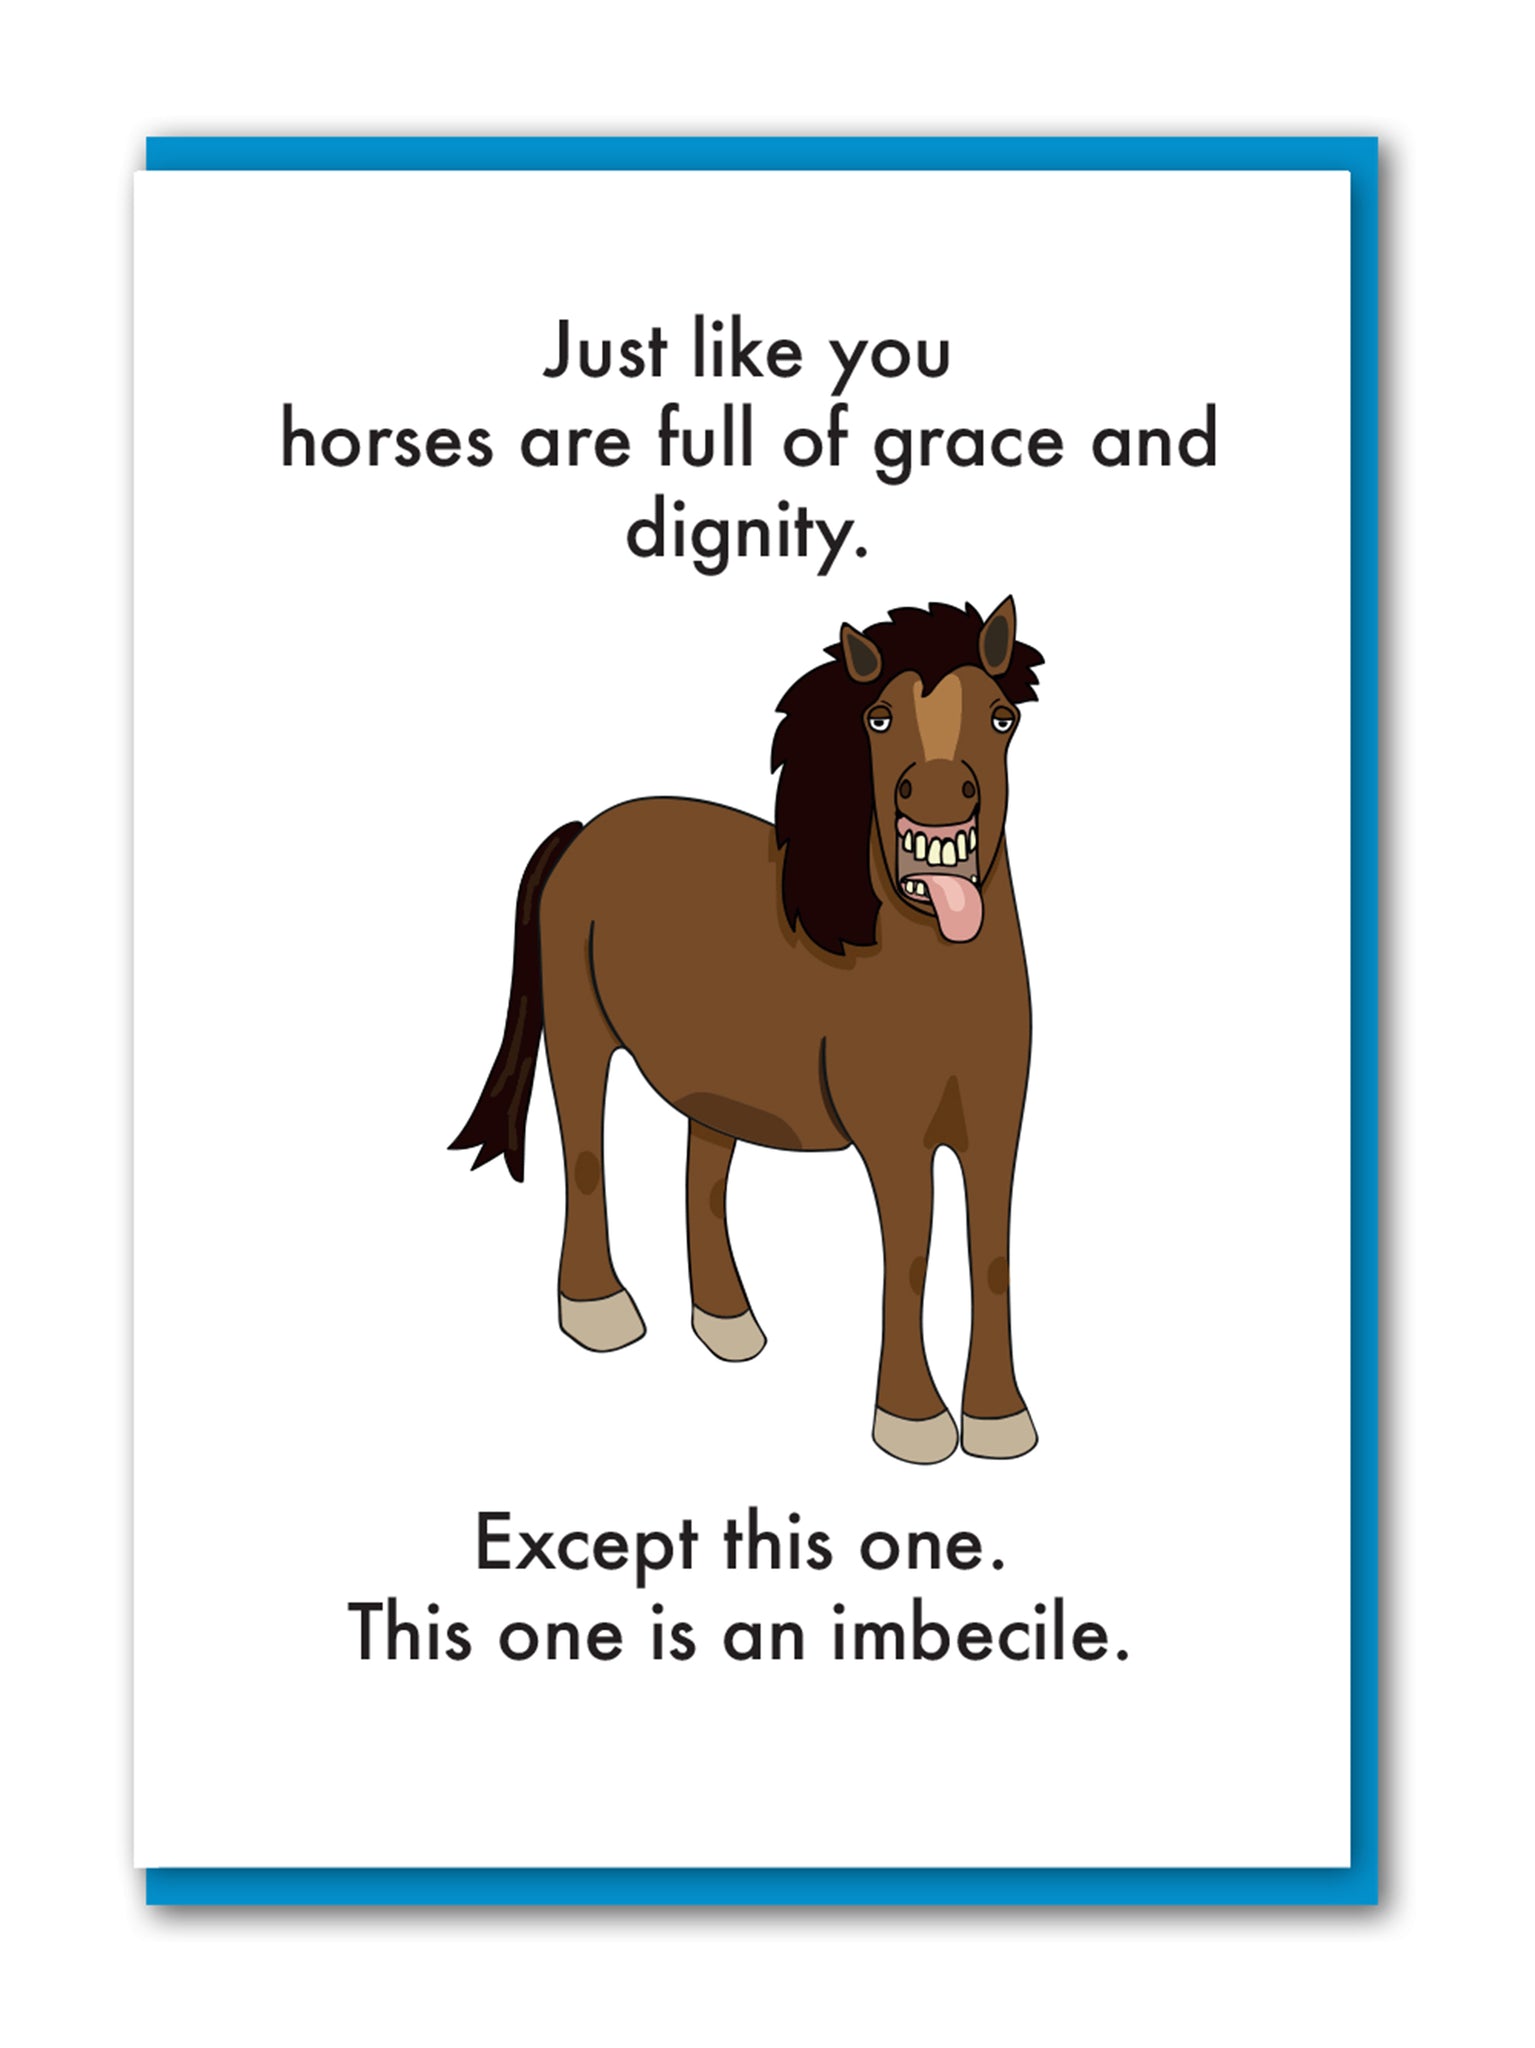 Horse is an imbecile card